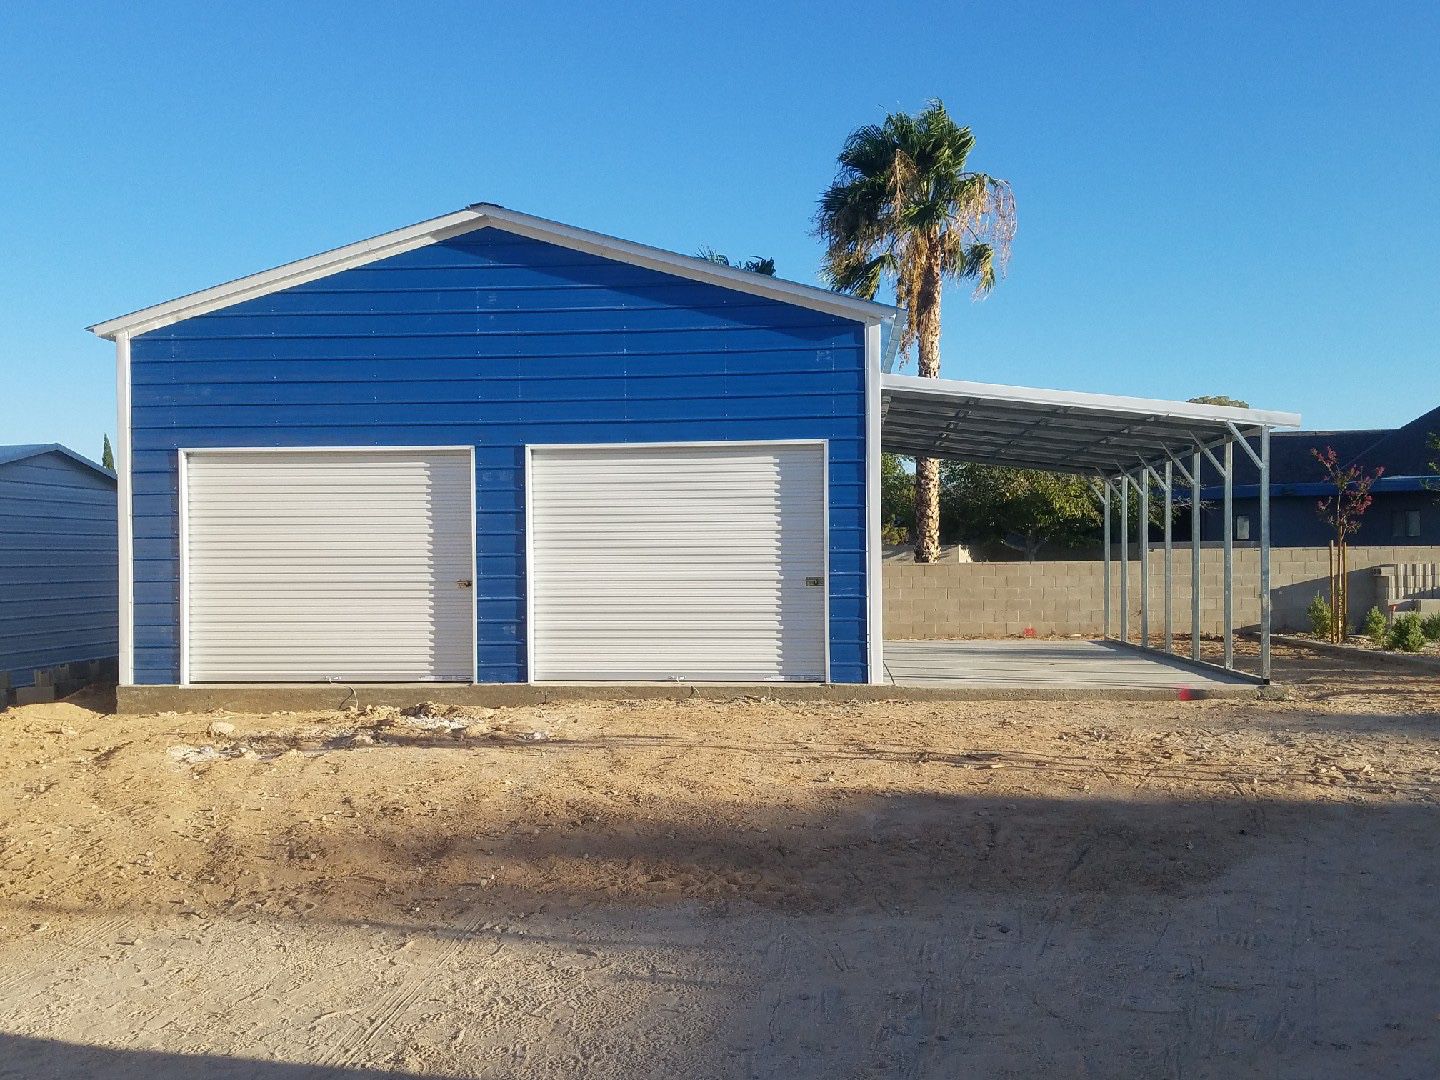 Custom Metal Structures For Your Needs/ Carports